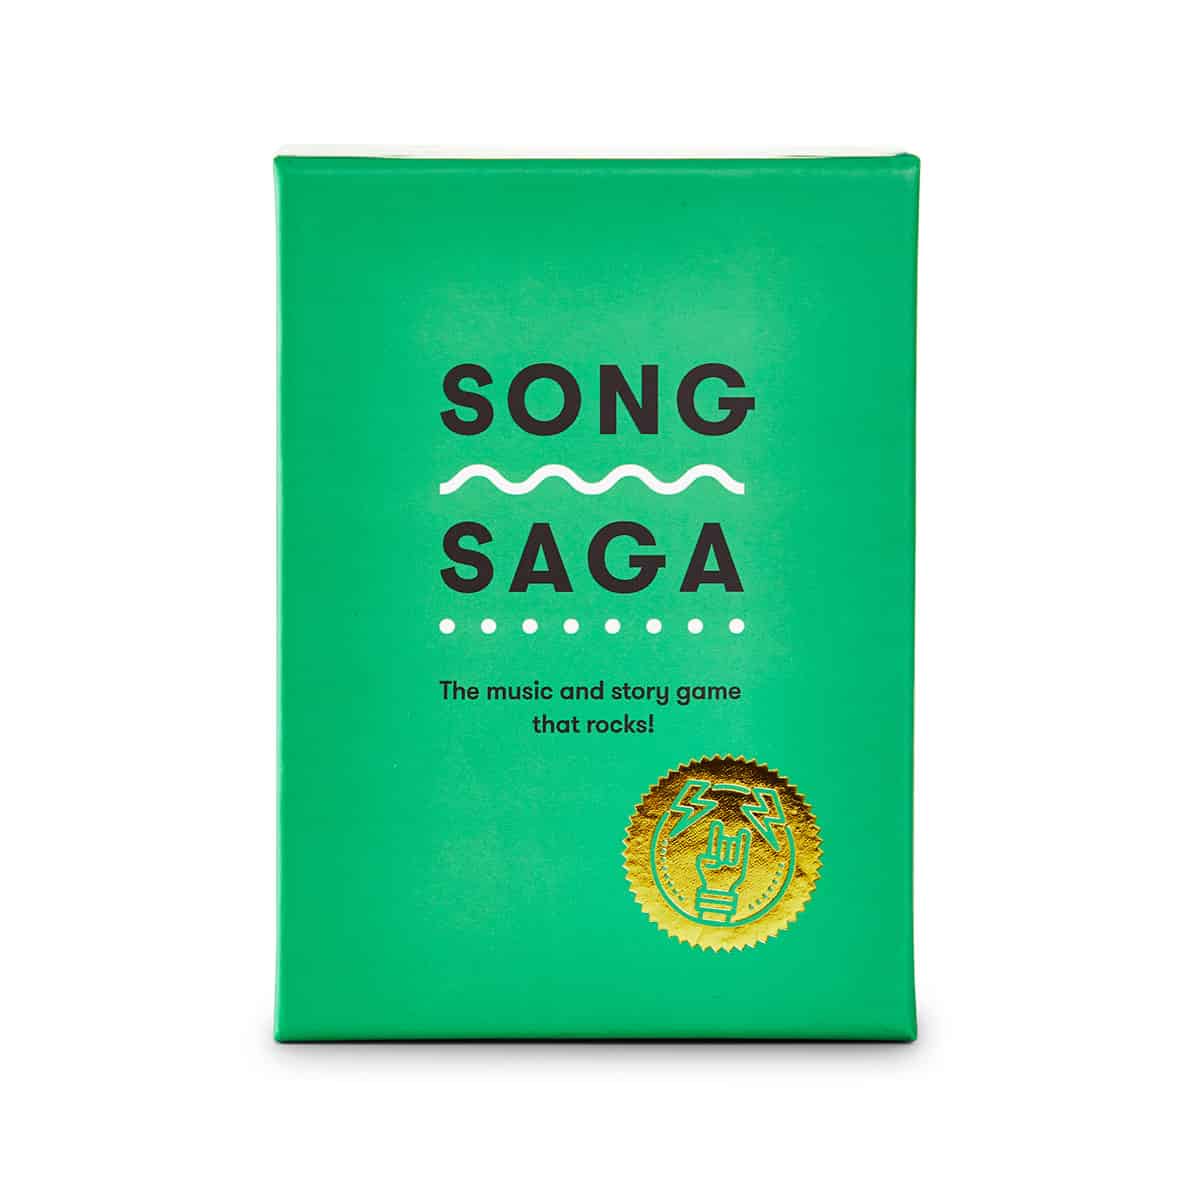 Song Saga Game, Music Game, Story Game, Party Game, Best Party Games, SongSaga, Green Box that Rocks, Card Game, Cards, You Rock Game, Conversation Starters Game, Spotify Game